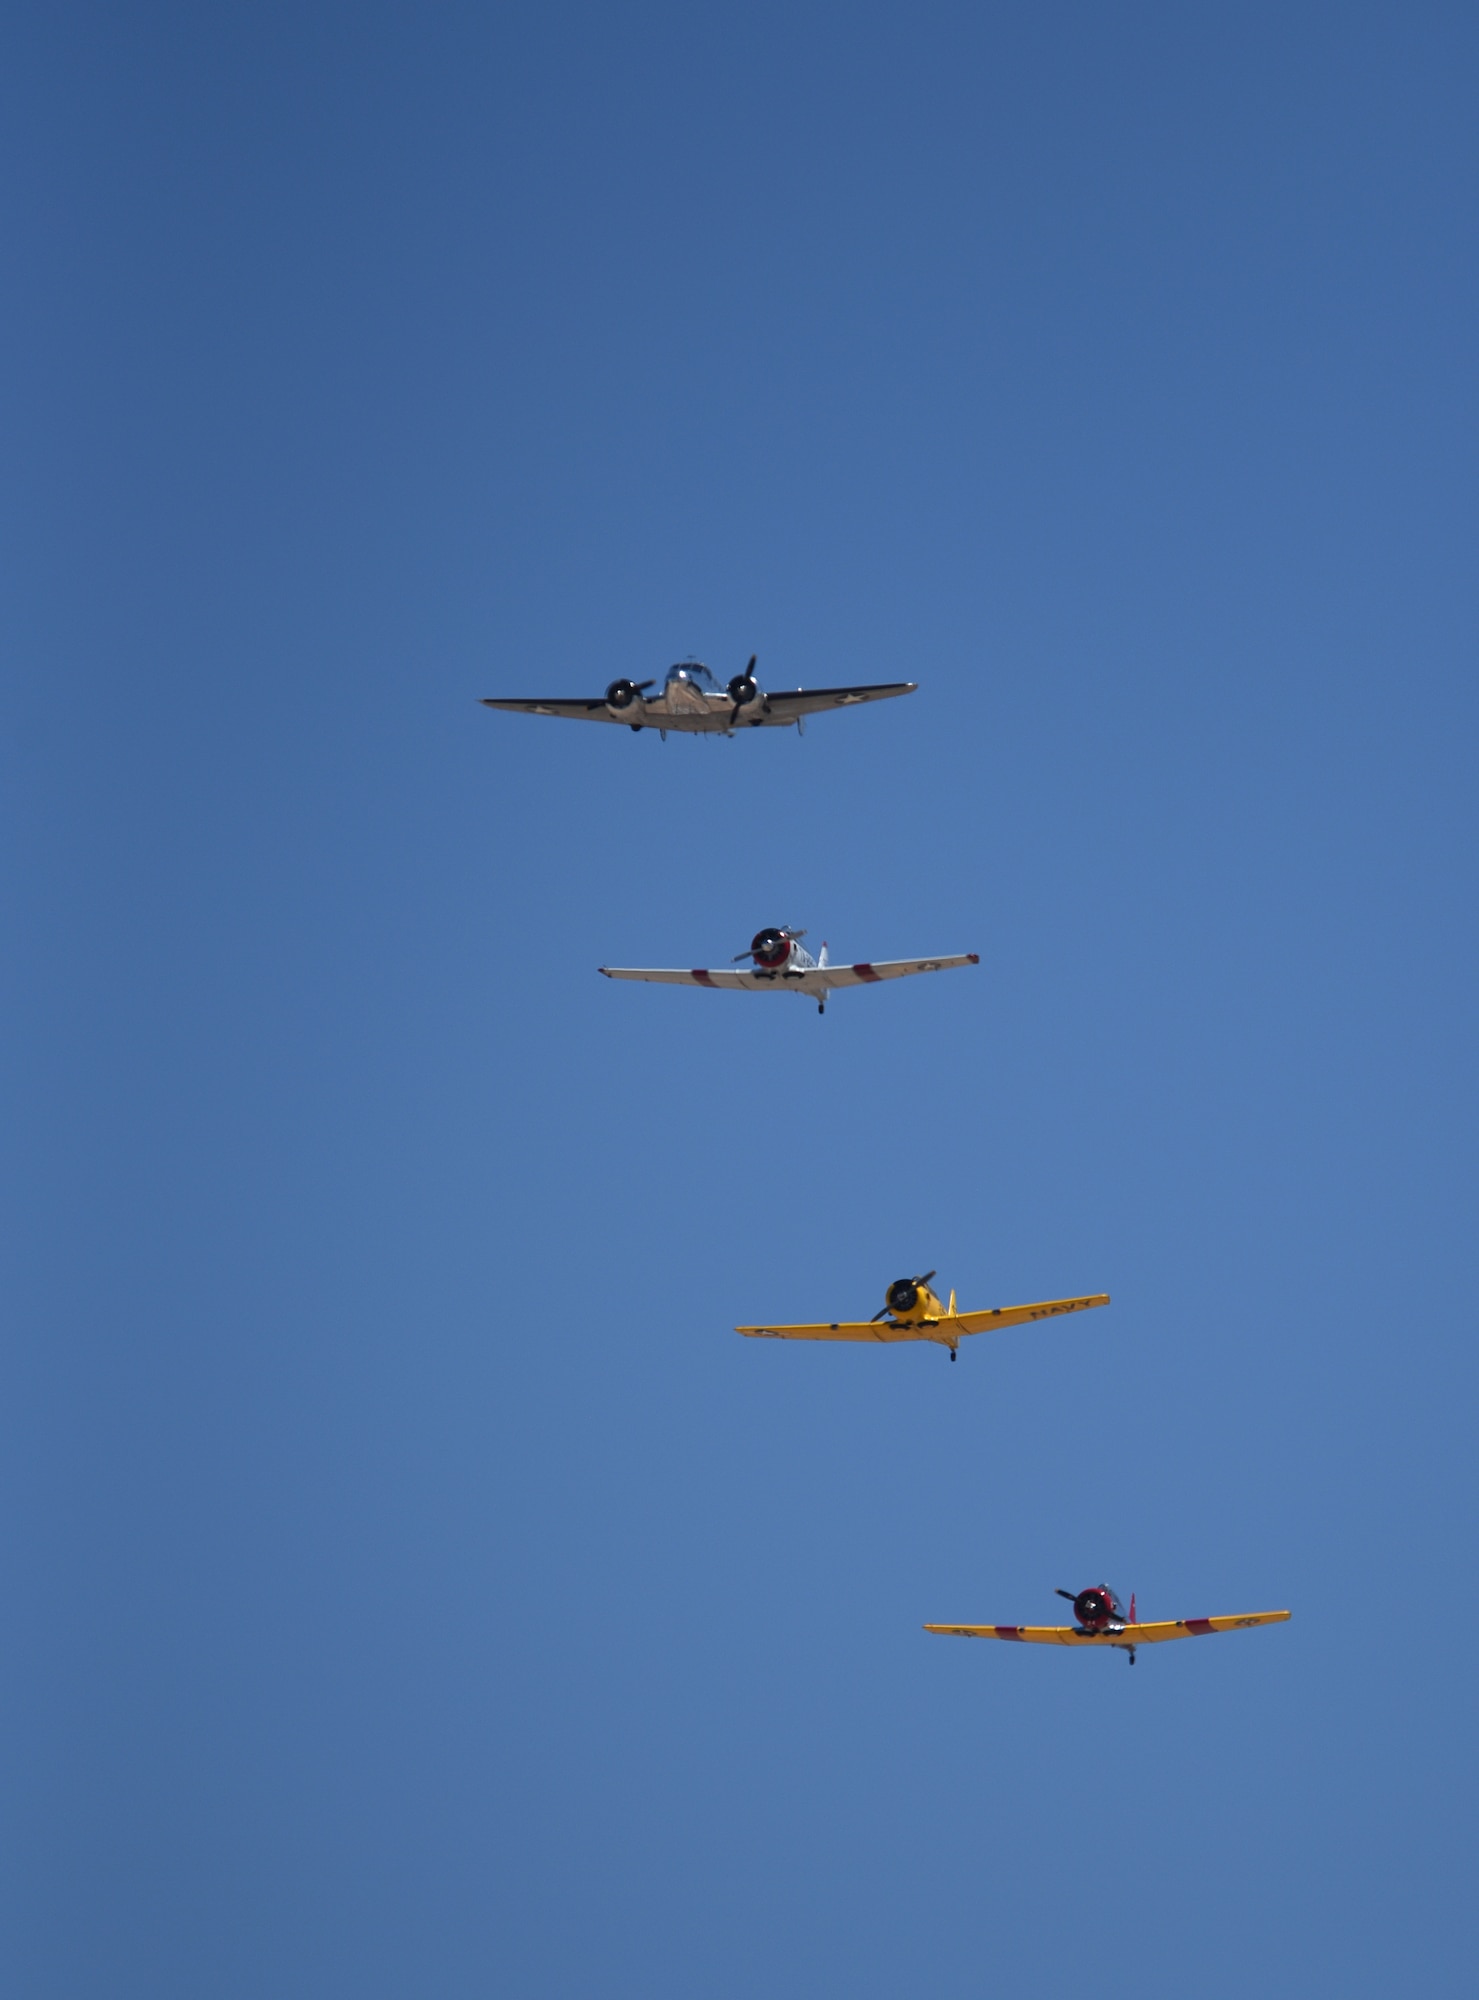 Four heritage aircraft fly over Holloman Air Force Base during the 2018 Legacy of Liberty open house in N.M., May 5, 2018. Holloman opened its gates to the public to show some of the capabilities of the U.S. Air Force, including an F-16 Fighting Falcon demonstration team, several static displays and a show from the Air Force Academy's Wings of Blue Team. (U.S. Air Force photo by Staff Sgt. Timothy Young)